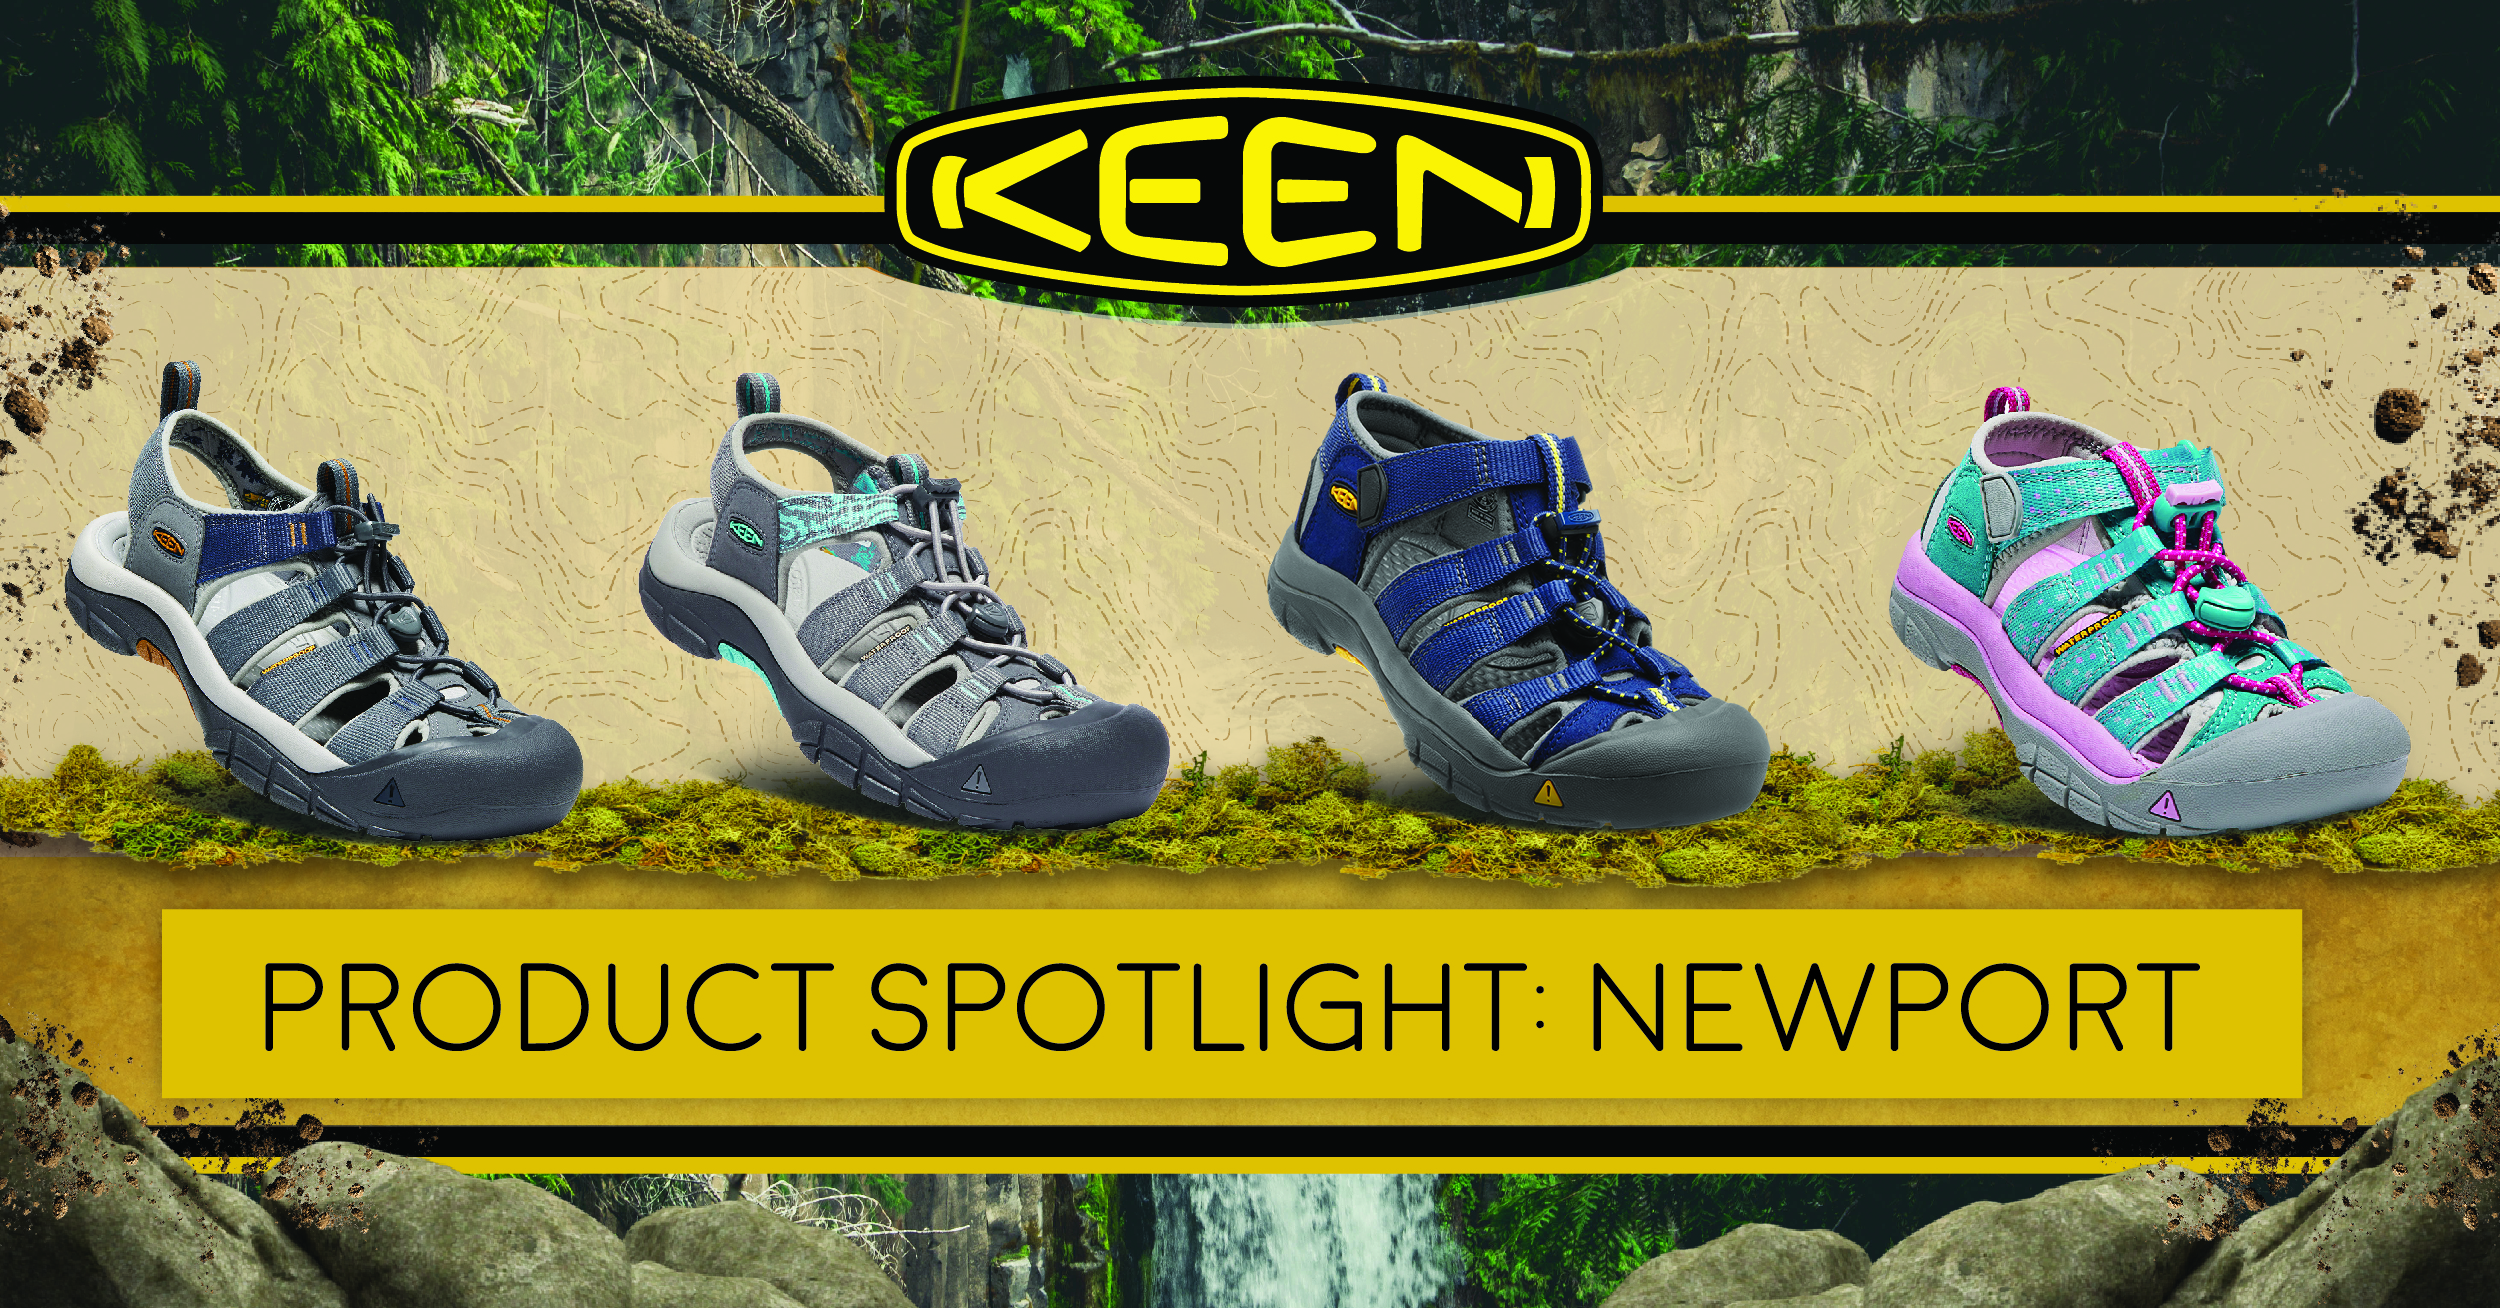 Hiking Sandals with a Twist: The KEEN Newport